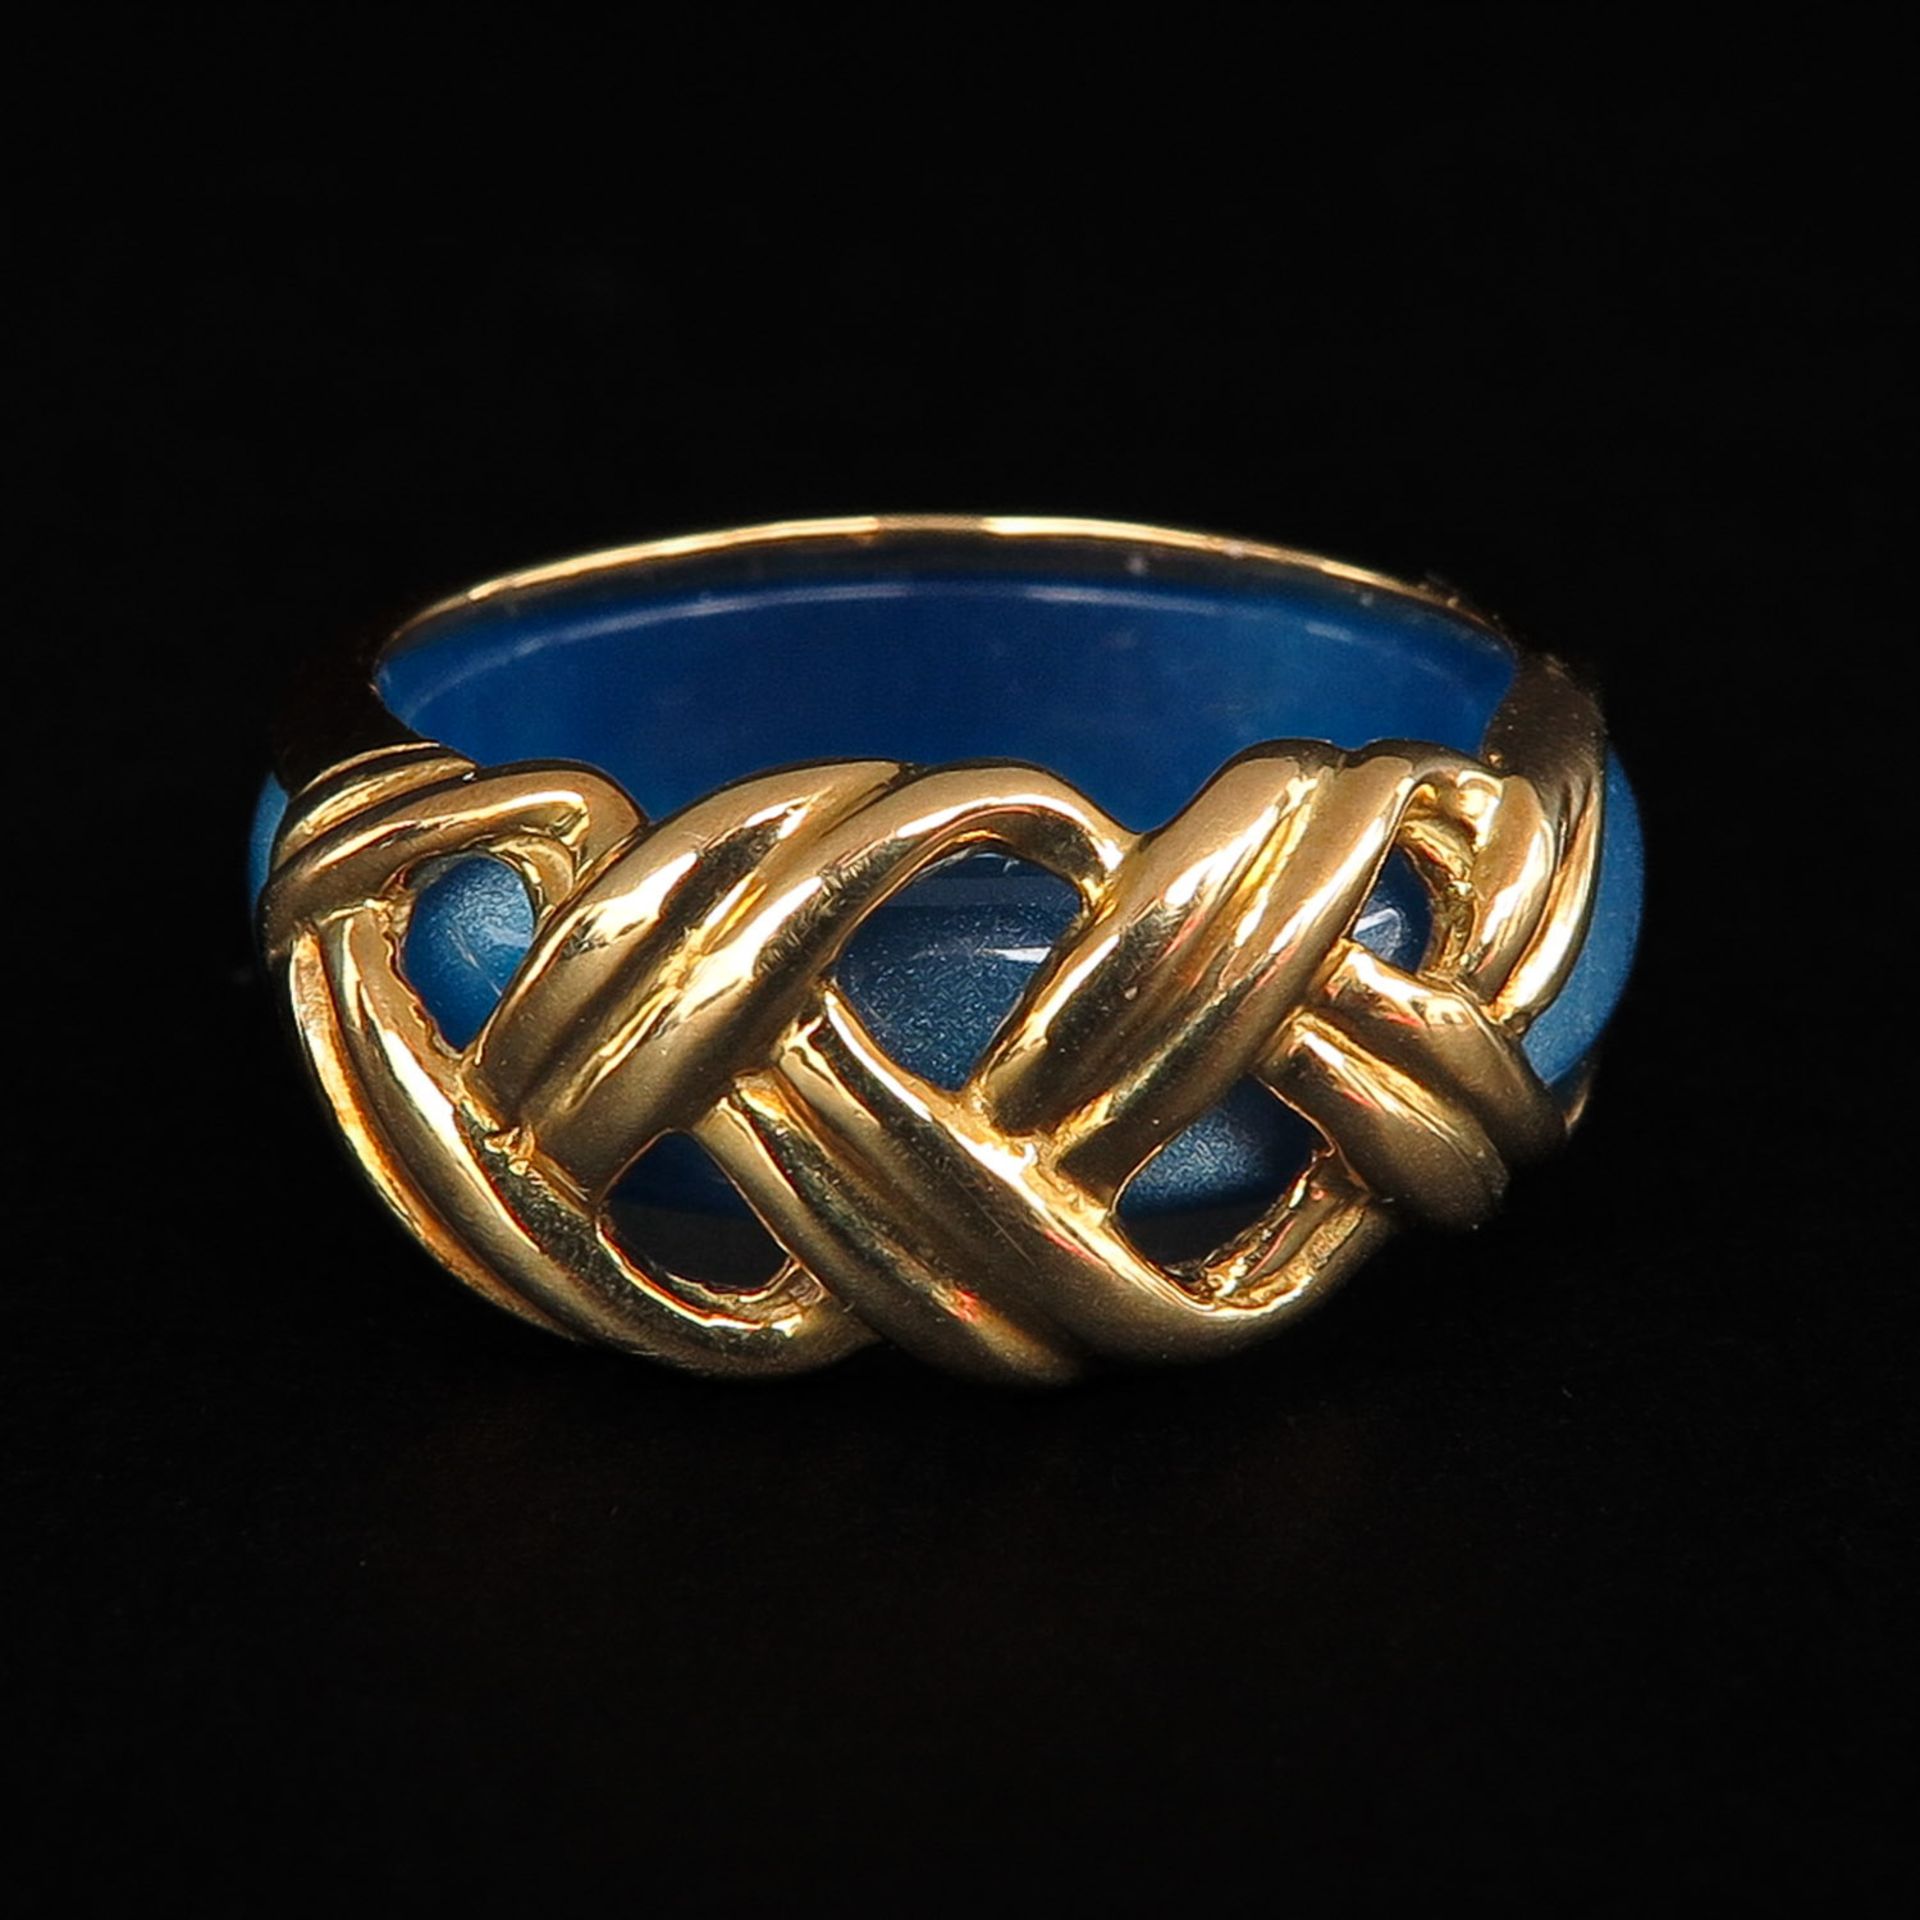 An 18KG Ring with Interchangeable Bands - Image 2 of 7